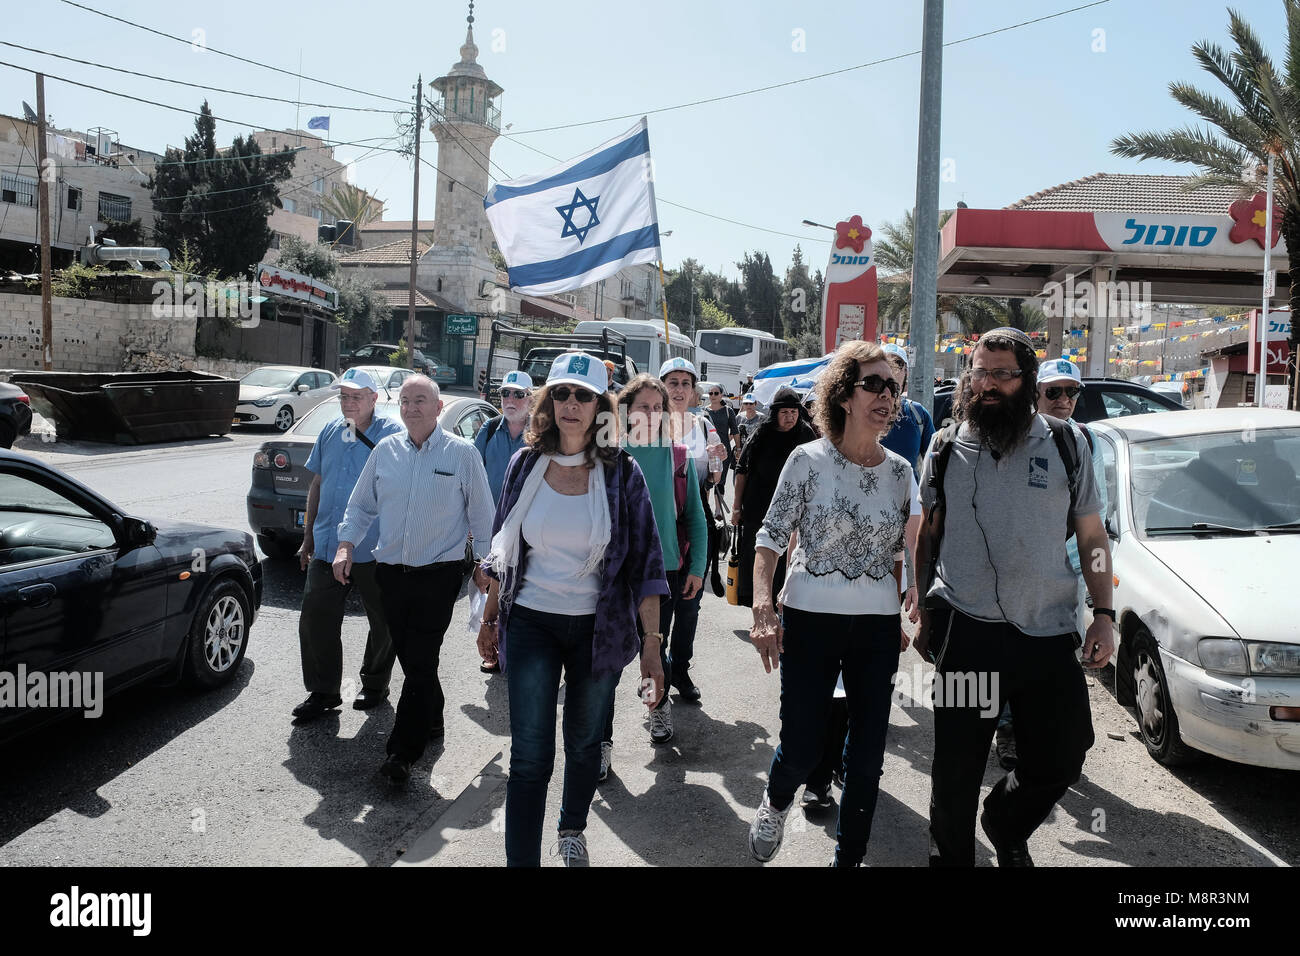 Jerusalem, Israel. 20th March, 2018. Jewish activists march past the Sheikh Jarrah Mosque as they follow in the path of the April 13th, 1948 convoy of doctors, nurses and medical supplies to besieged Hadassah Hospital on Mount Scopus, marking 70 years (Hebrew calendar) to the Arab convoy ambush and massacre of 78 people in the Arab neighborhood of Sheikh Jarrah. Credit: Nir Alon/Alamy Live News Stock Photo